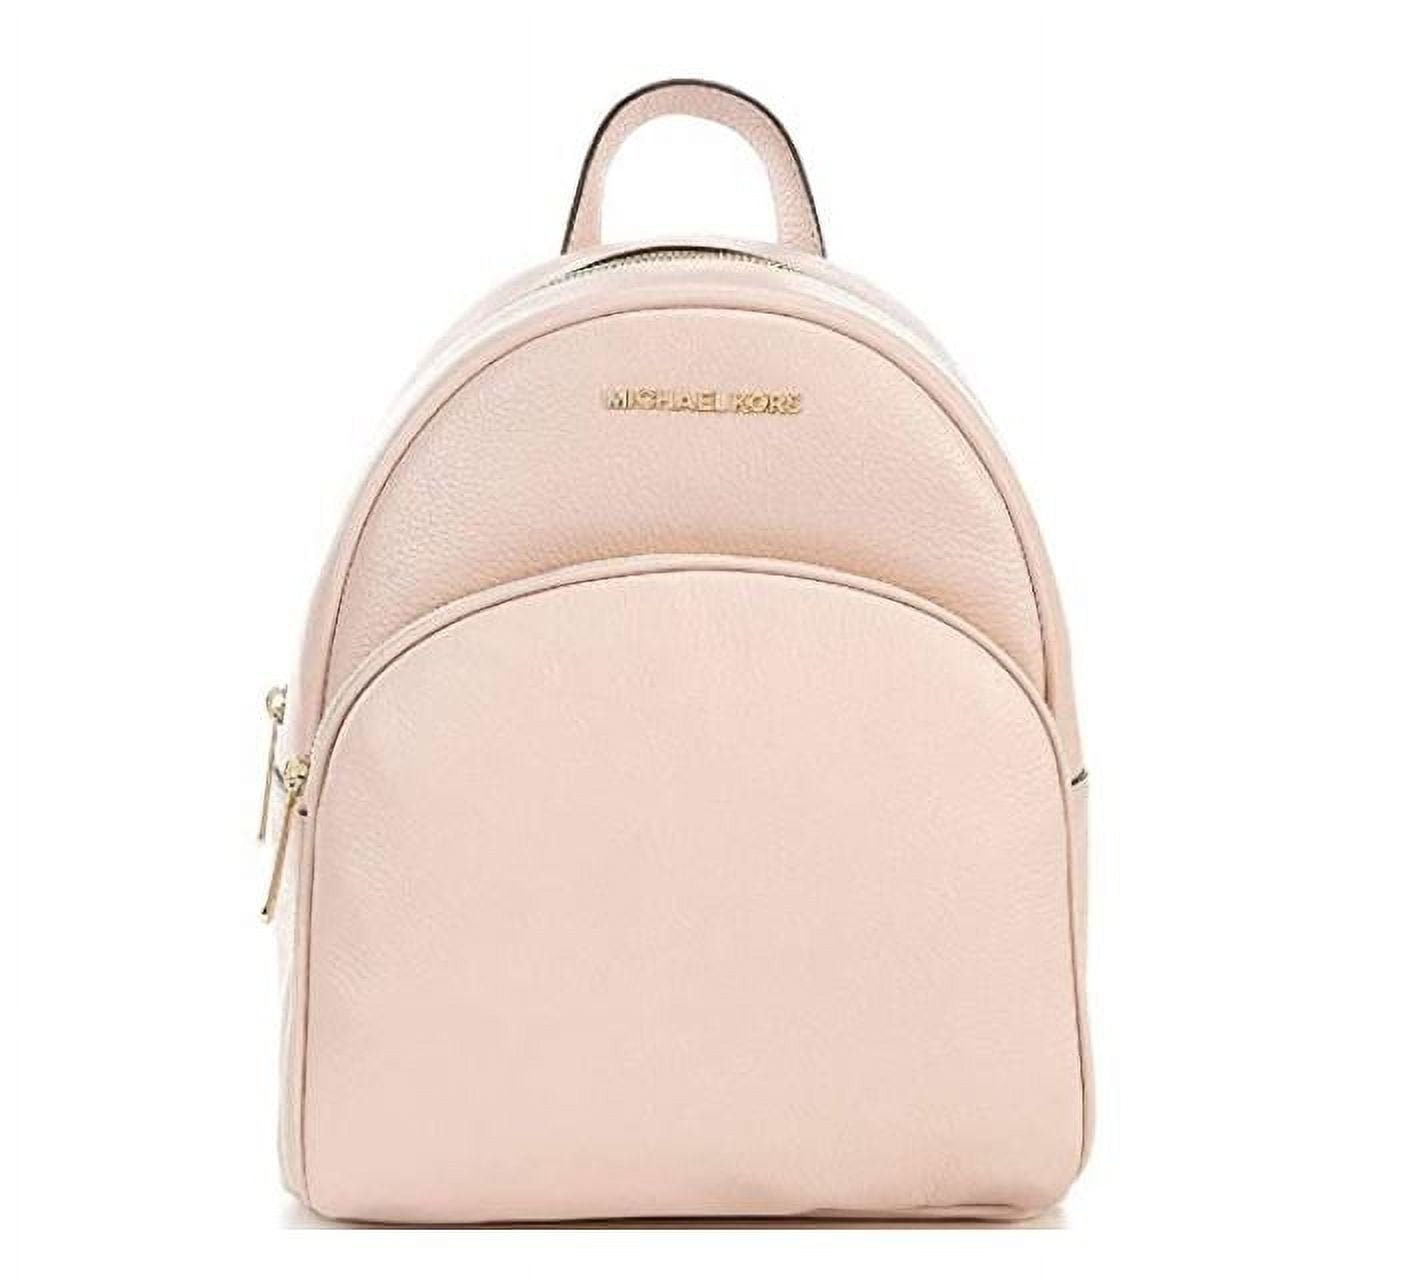 MICHAEL KORS: backpack for woman - Pink